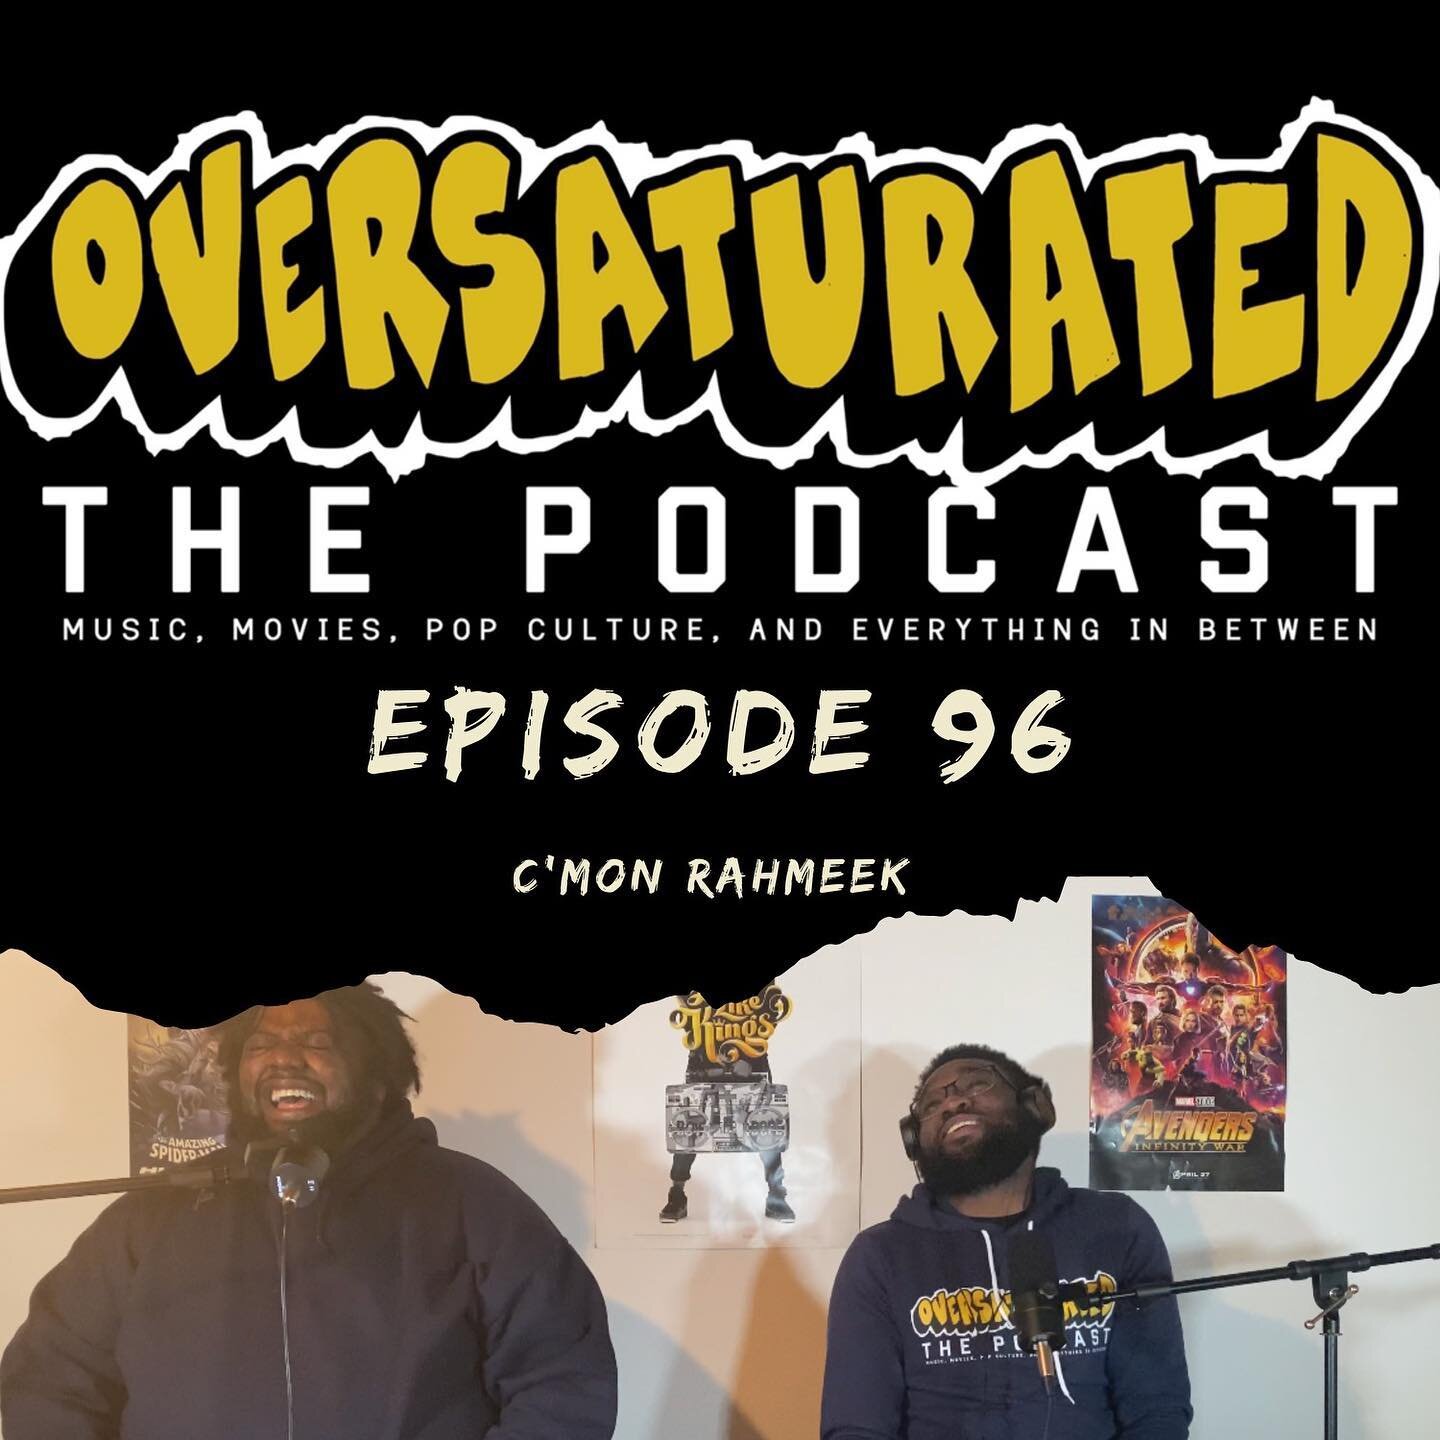 Episode 96 is now Available! C&rsquo;Mon Rahmeek. 
.
.

https://linktr.ee/oversatthepodcast
.
.
Topics Discussed 
-D&rsquo;Angelo Verzuz
-Miseducation of Lauryn Hill Is Diamond?
-Rick Ross x 2 Chainz Tiny Desk
-Mortal Kombat Trailer Thoughts
-Meek Mi